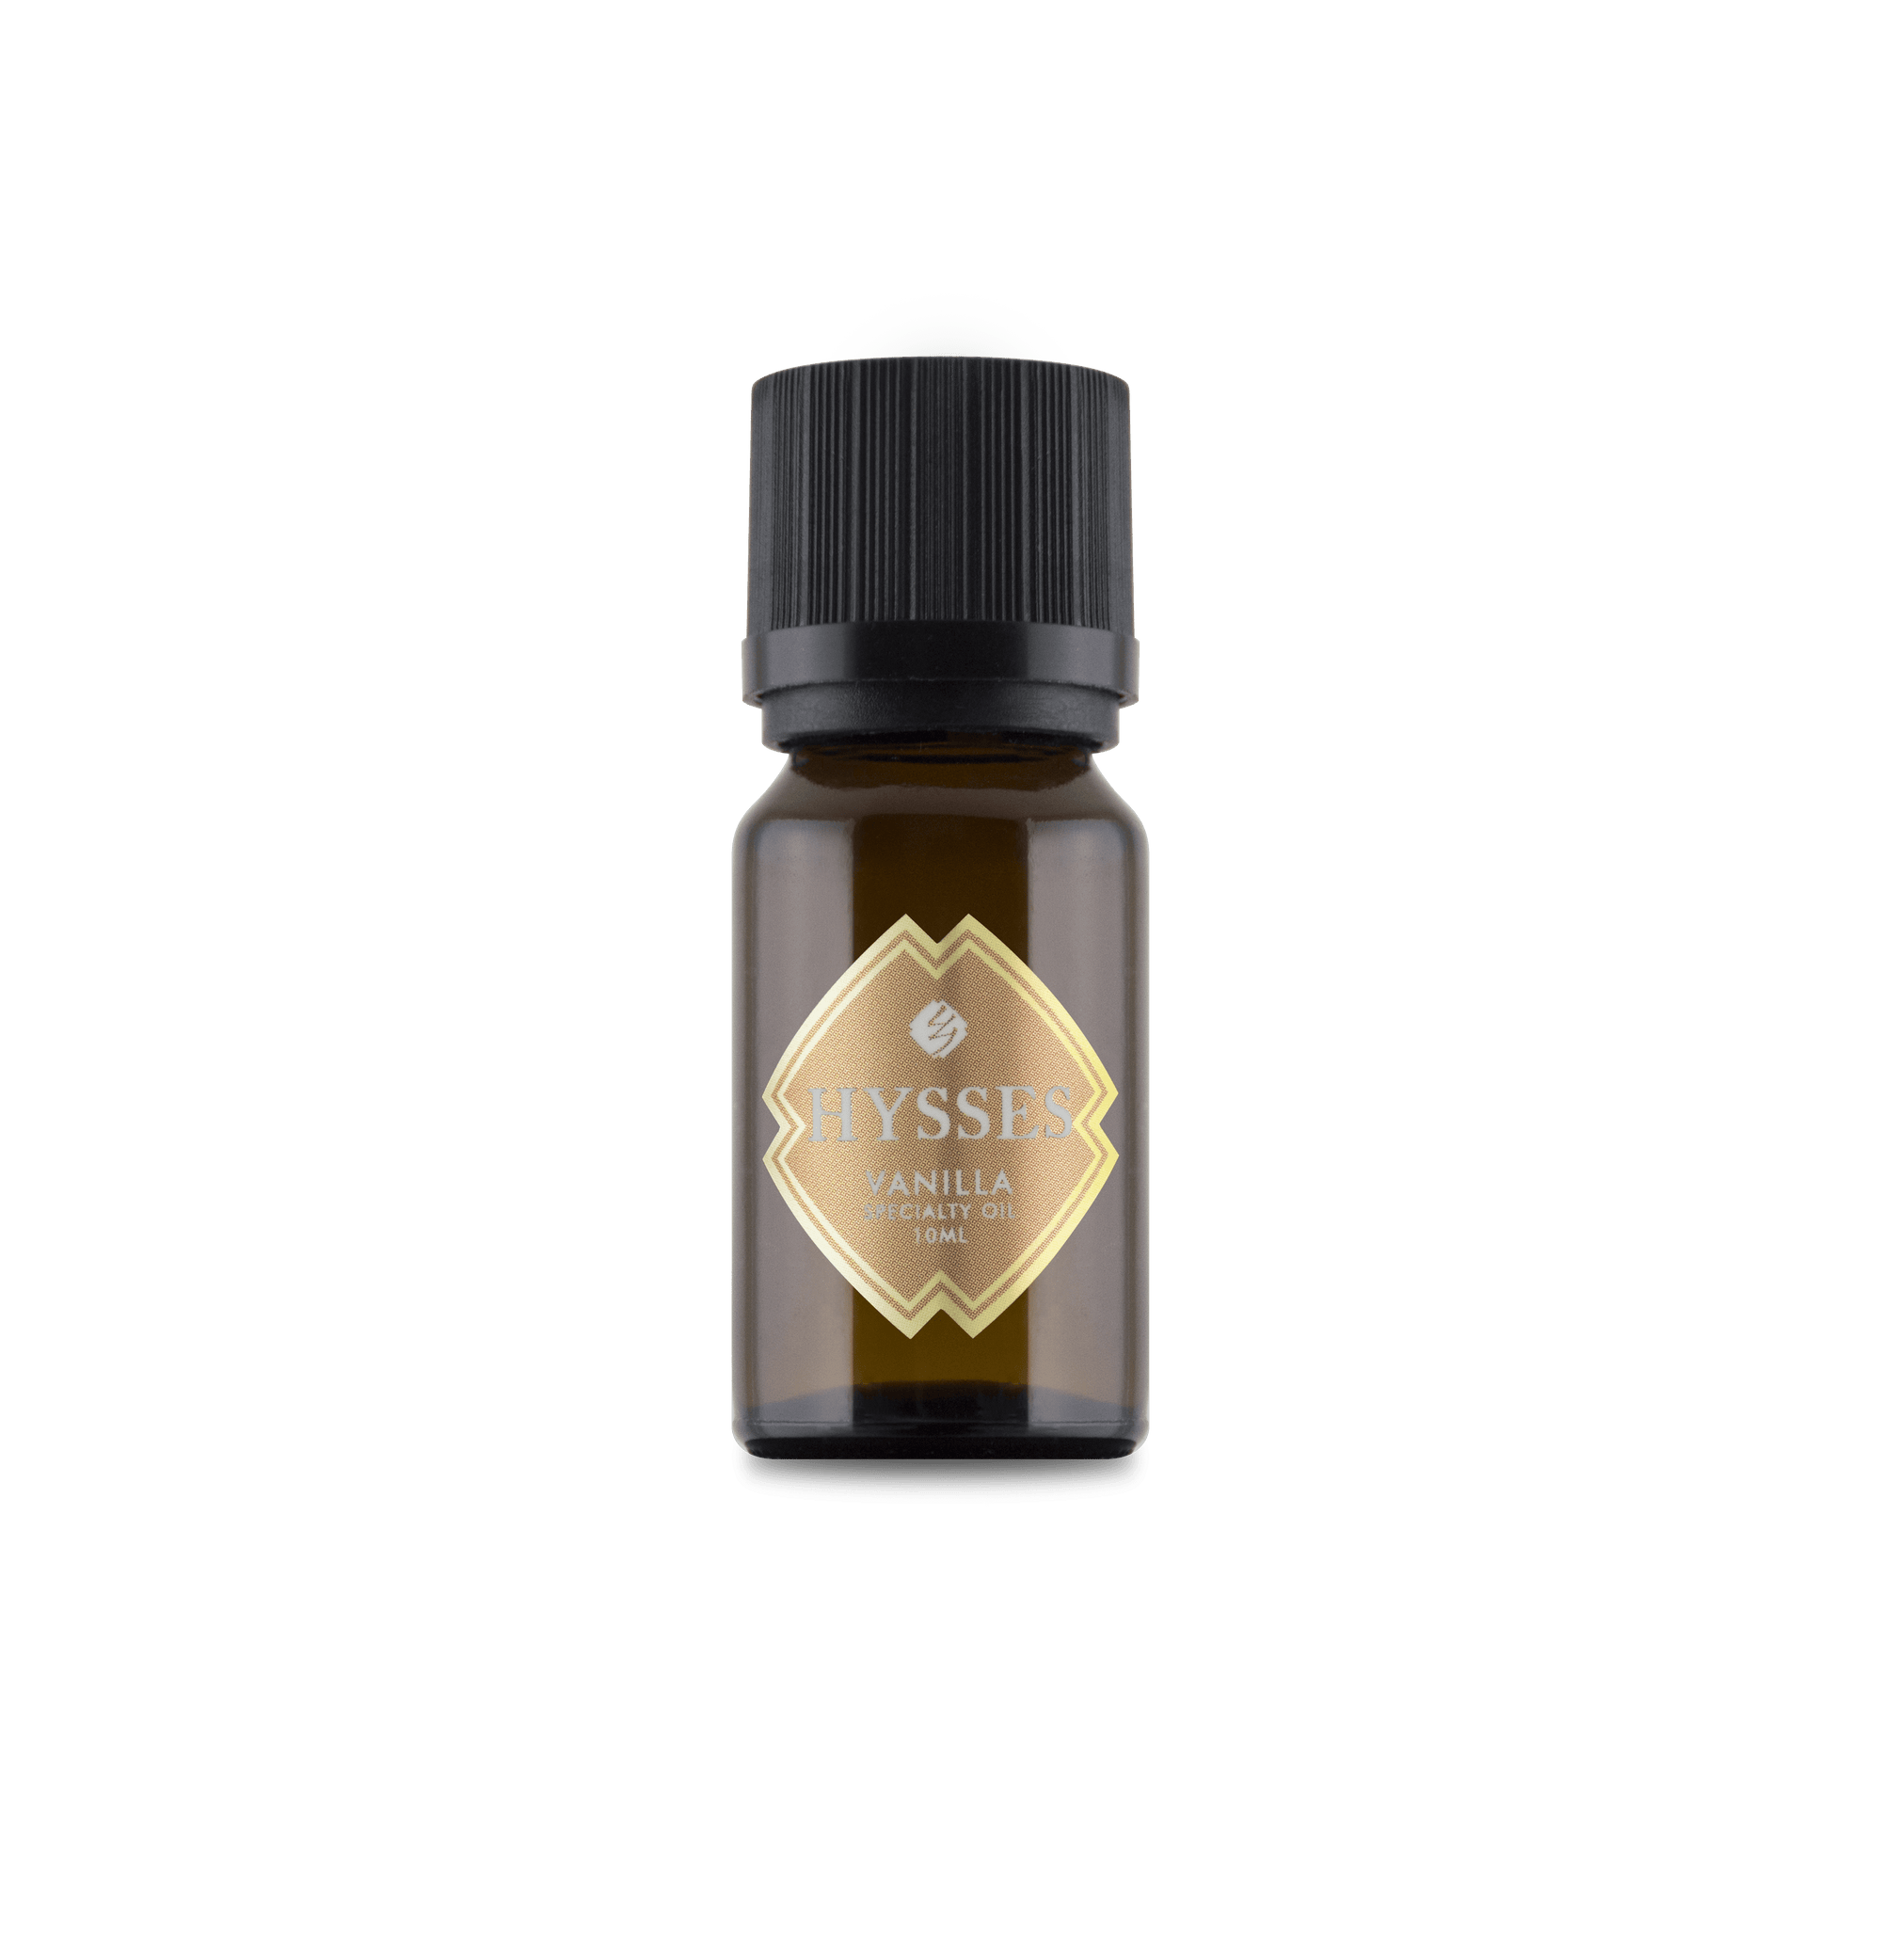 Hysses Essential Oil Specialty Oil Vanilla Absolute (30%), 10ml